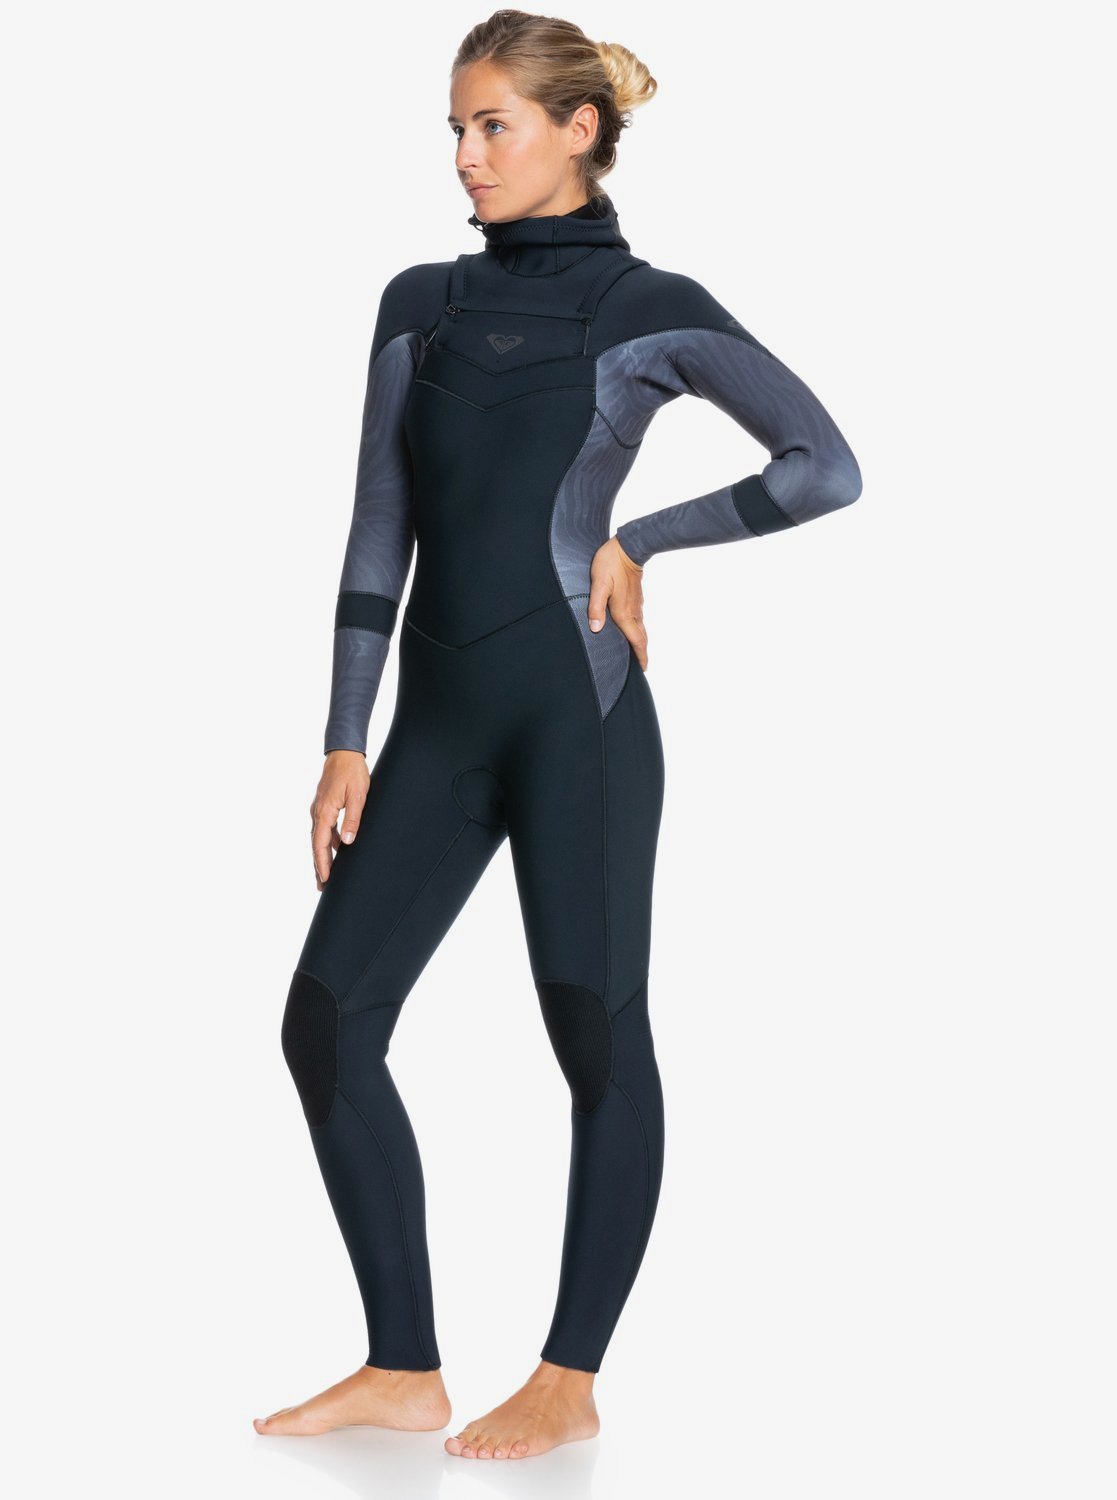 Roxy Syncro 5/4/3mm Hooded Wetsuit - Chest Zip